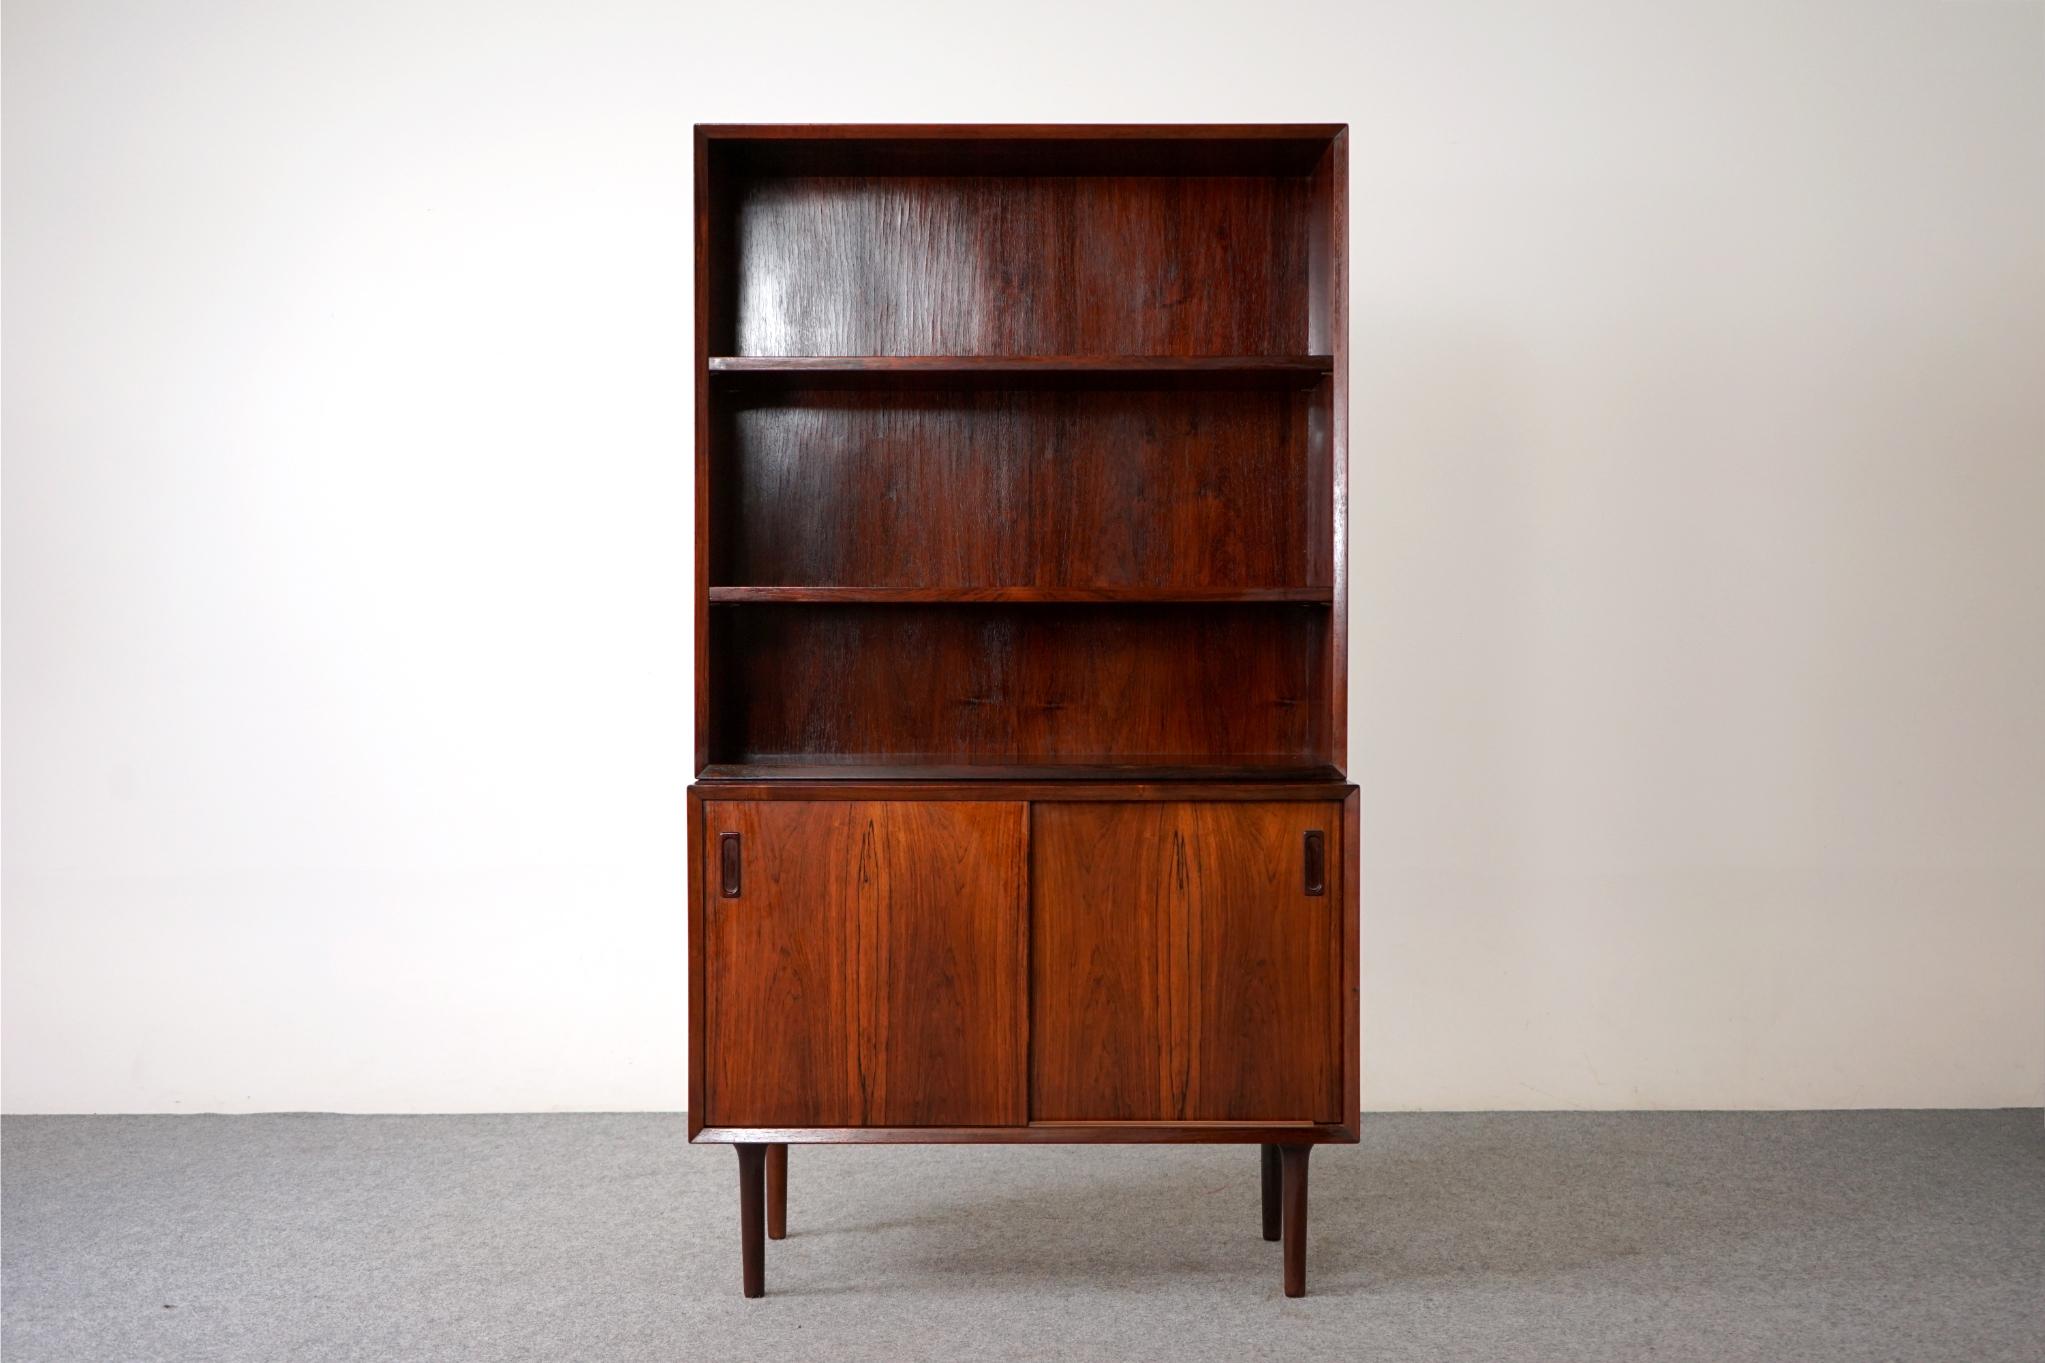 Rosewood Scandinavian bookcase/cabinet by Lyby Mobler, circa 1960's. Open bookcase rests upon a sliding door cabinet, could be used separately. Case sits upon removable, tapered solid wood legs, adjustable shelving to suit your needs! Stamped